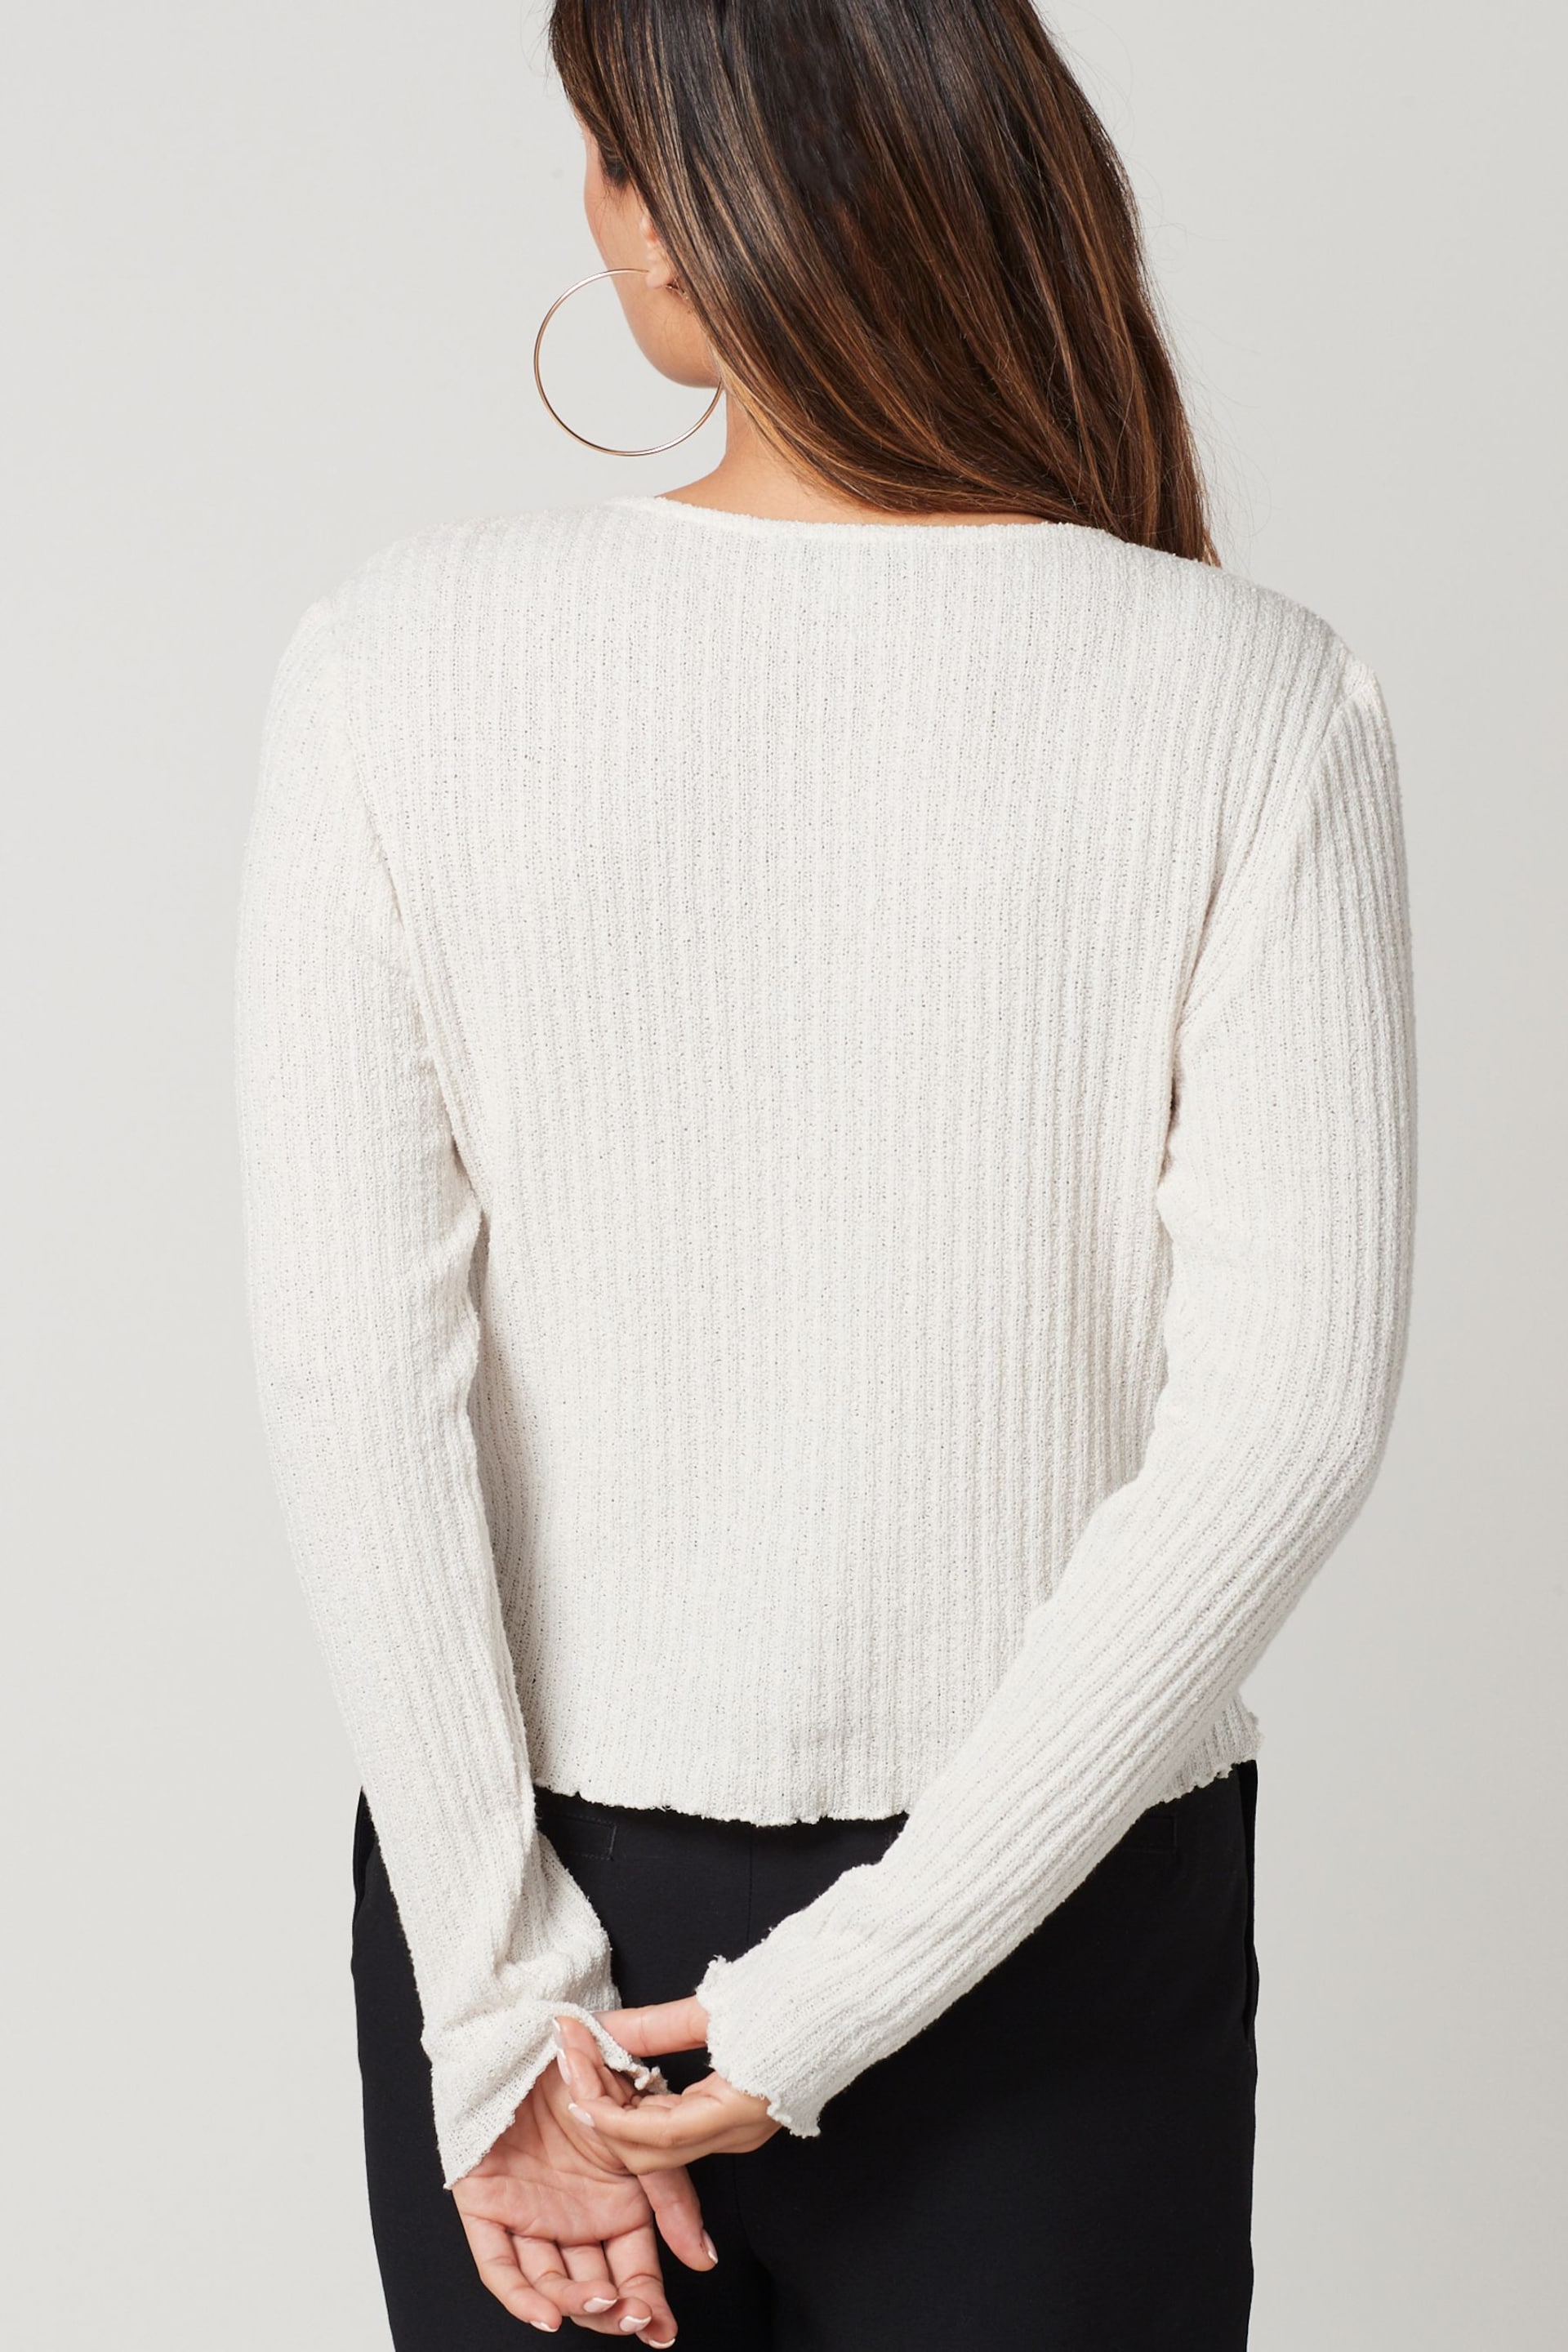 Ecru White Long Sleeve Knit Look Button Detail Cardigan - Image 2 of 5